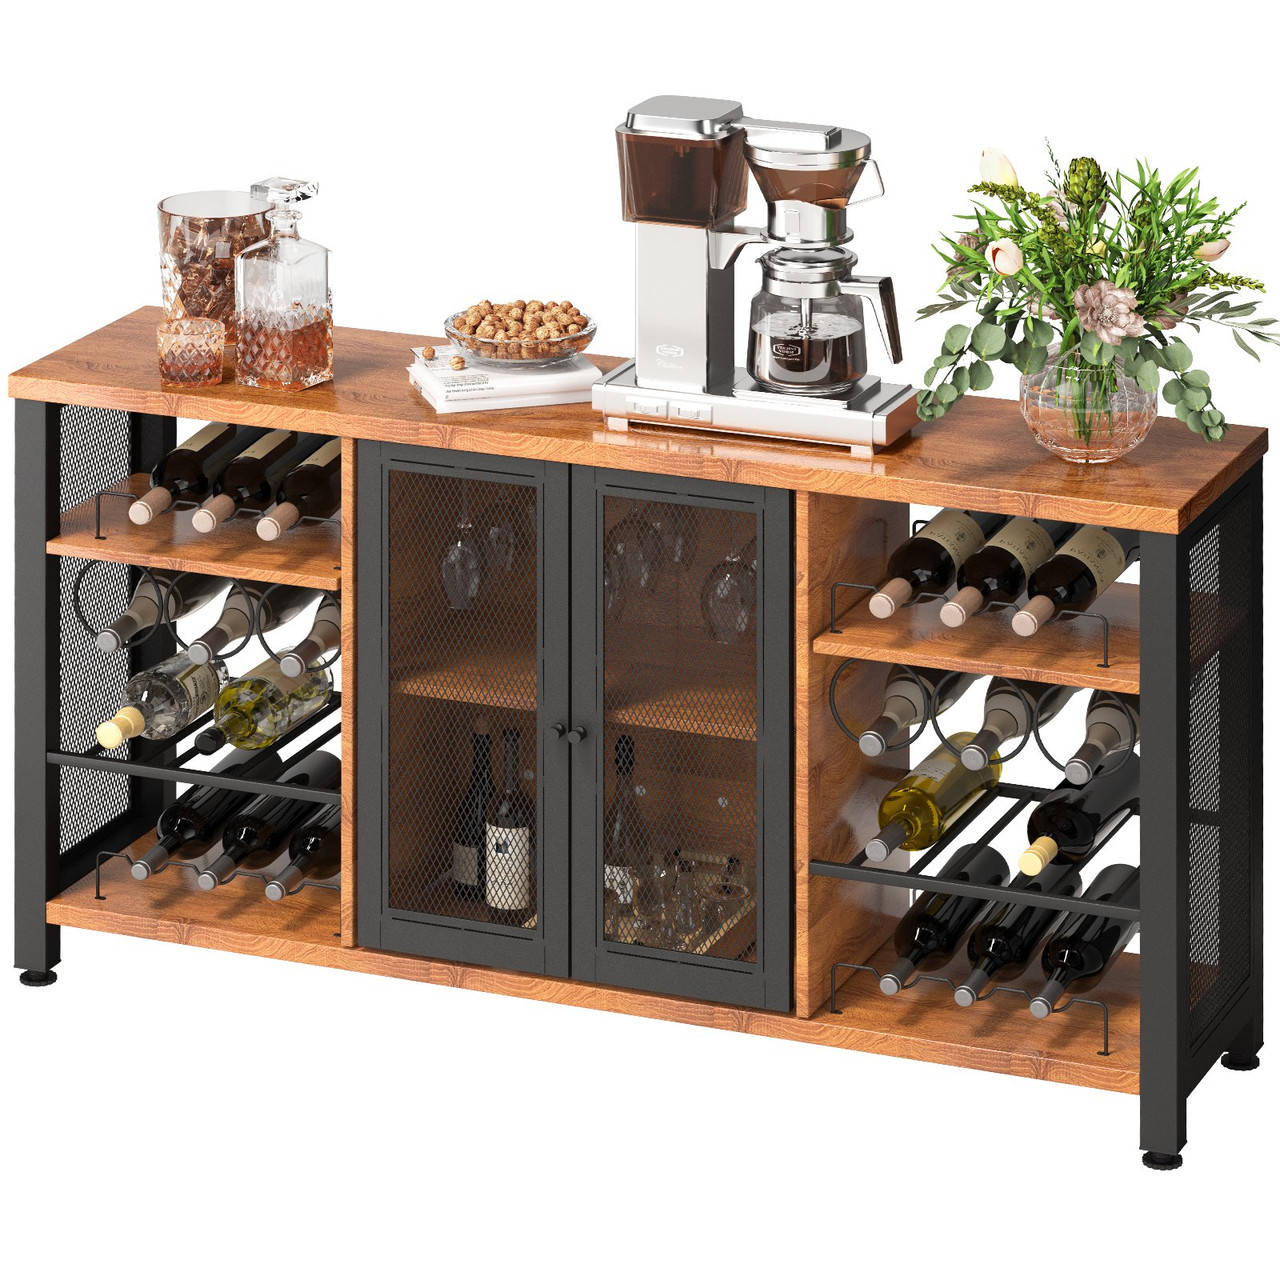 Industrial Bar Cabinet, Wine Table for Liquor with Glass Holder, Wine Rack and Metal Sideboard, Farmhouse Wood Coffee Bar for Living Room, Dining Room (55 Inch, Rustic Oak)